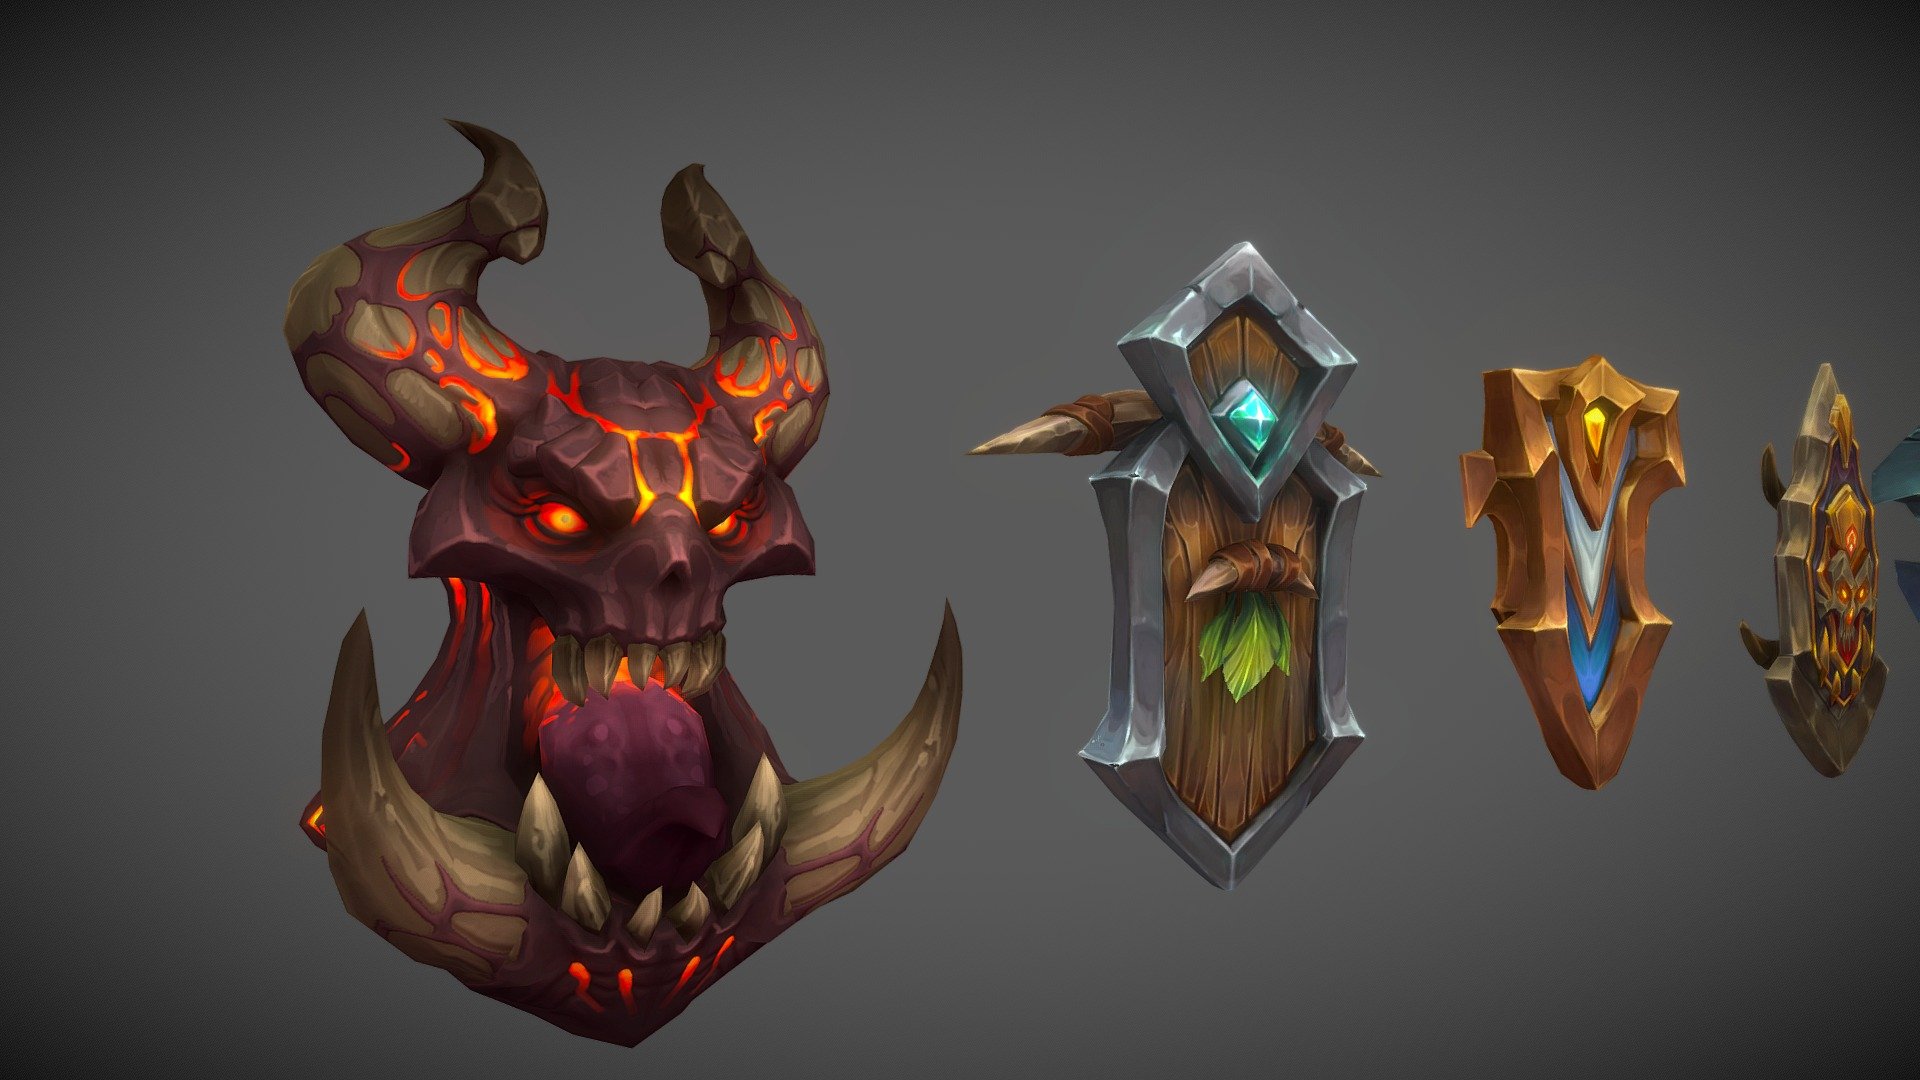 Stylized weapons for a project.

Software used: Zbrush, Autodesk Maya, Autodesk 3ds Max, Substance Painter - Stylized Fantasy Shields - 3D model by N-hance Studio (@Malice6731) 3d model